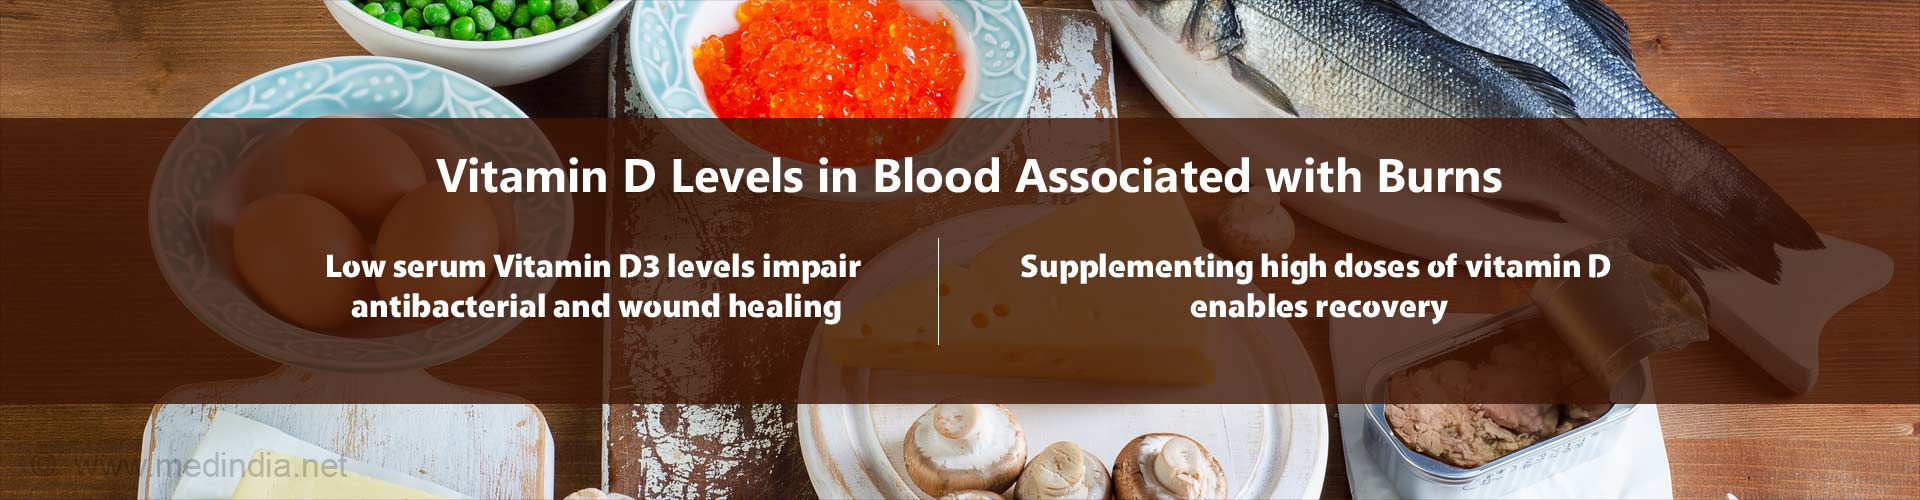 vitamin D levels in blood associated with burns
- low serum vitamin D3 levels impair antibacterial and wound healing
- supplementing high doses of vitamin D enables recovery